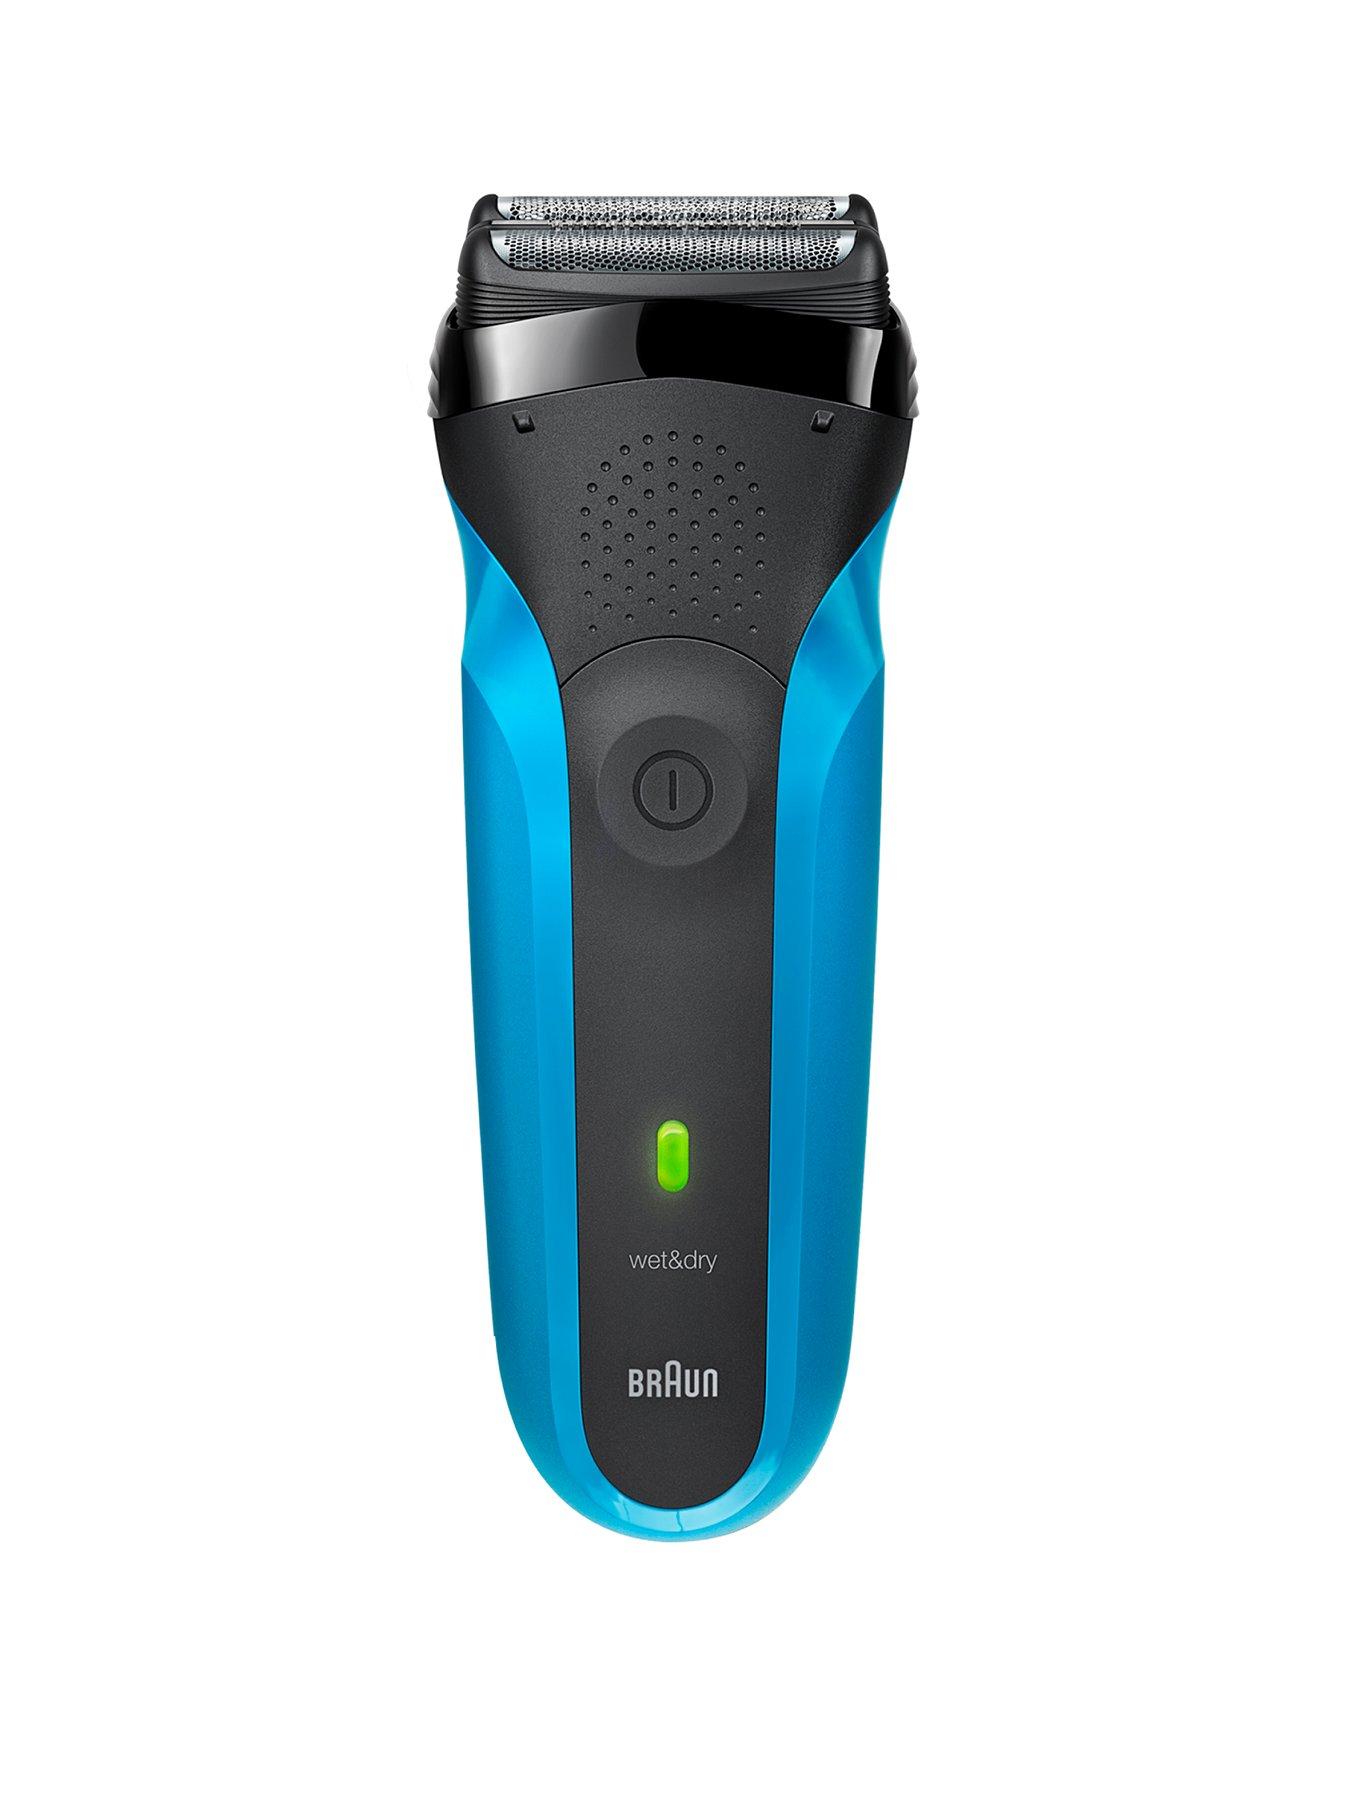 Braun Series XT5100: all-in-one Trimmer With efficient 4D Blade